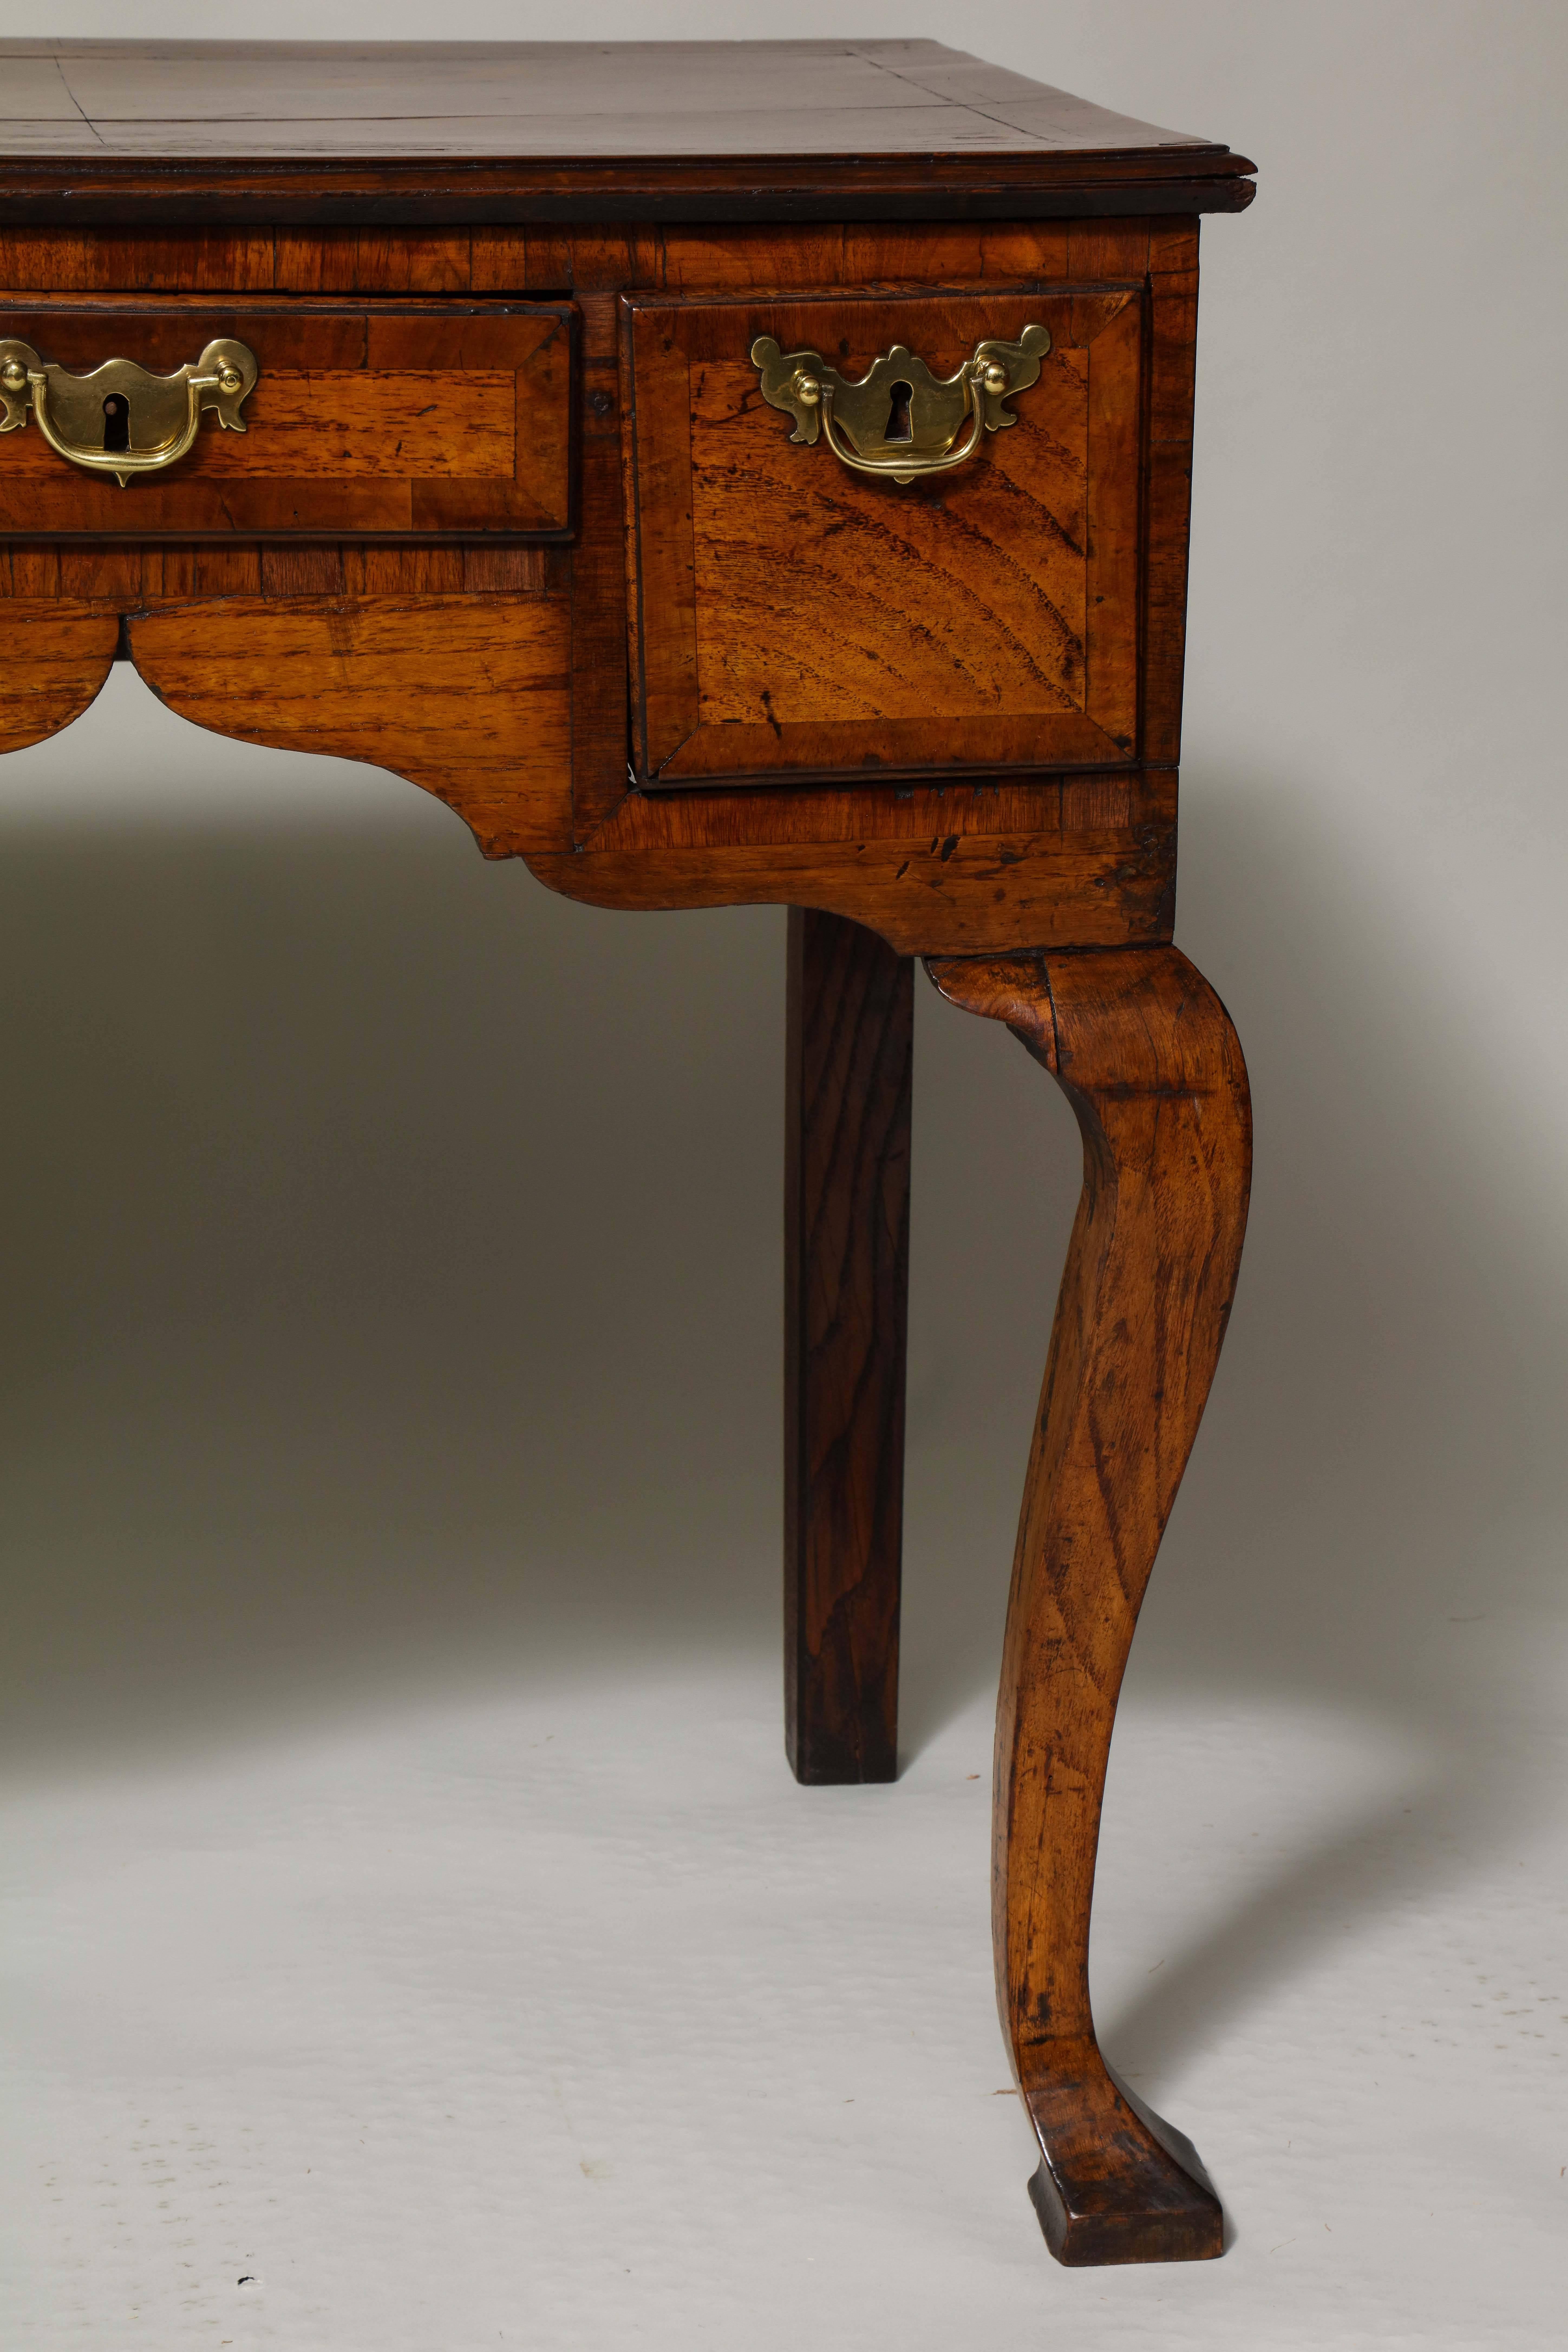 Early 18th century English oak and walnut lowboy, the quarter bookmatched top with herringbone stringing and walnut crossbanding, over two deep and one shallow drawer with crossbanded edges, standing on square shaped legs with suggestions of a